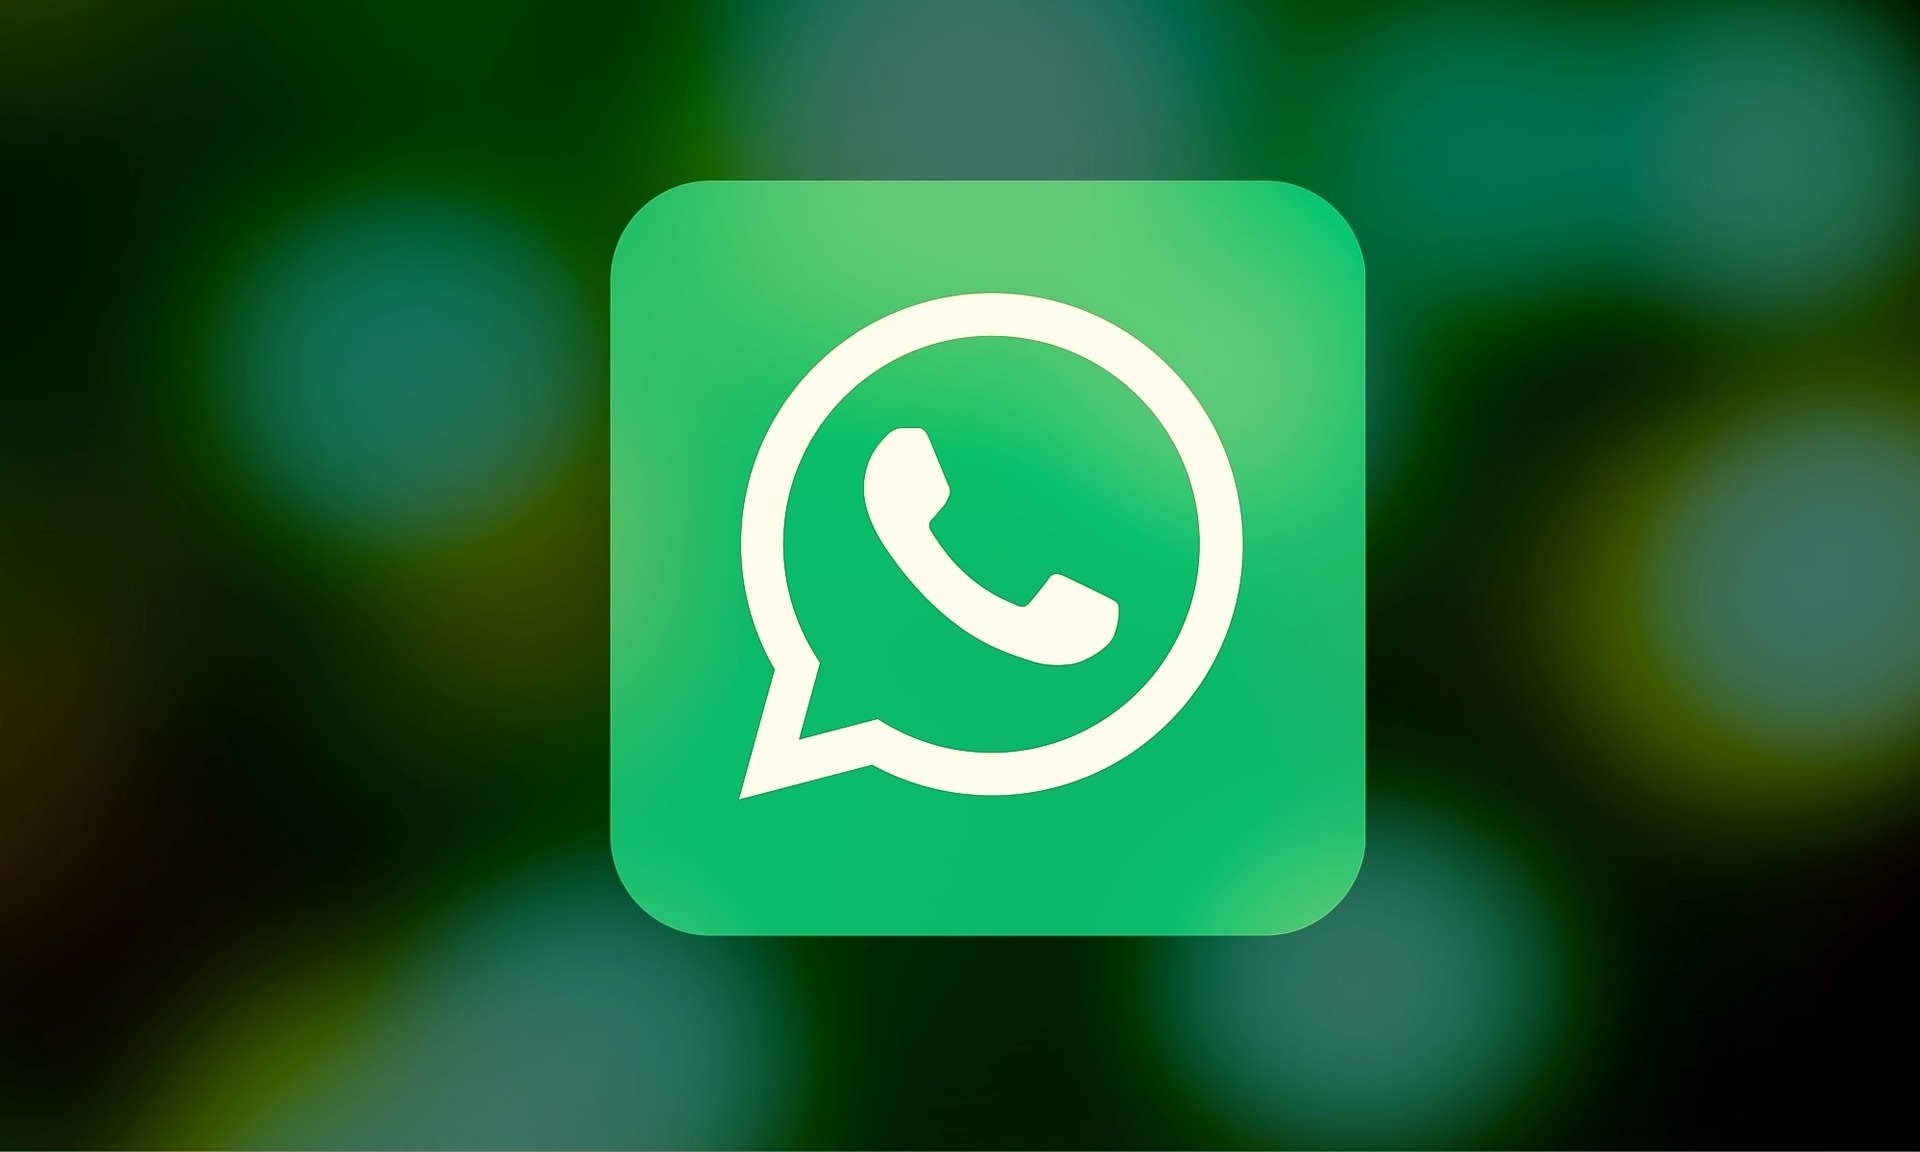 A WhatsApp logo is in the foreground of the image, with a blurred, greenish background.